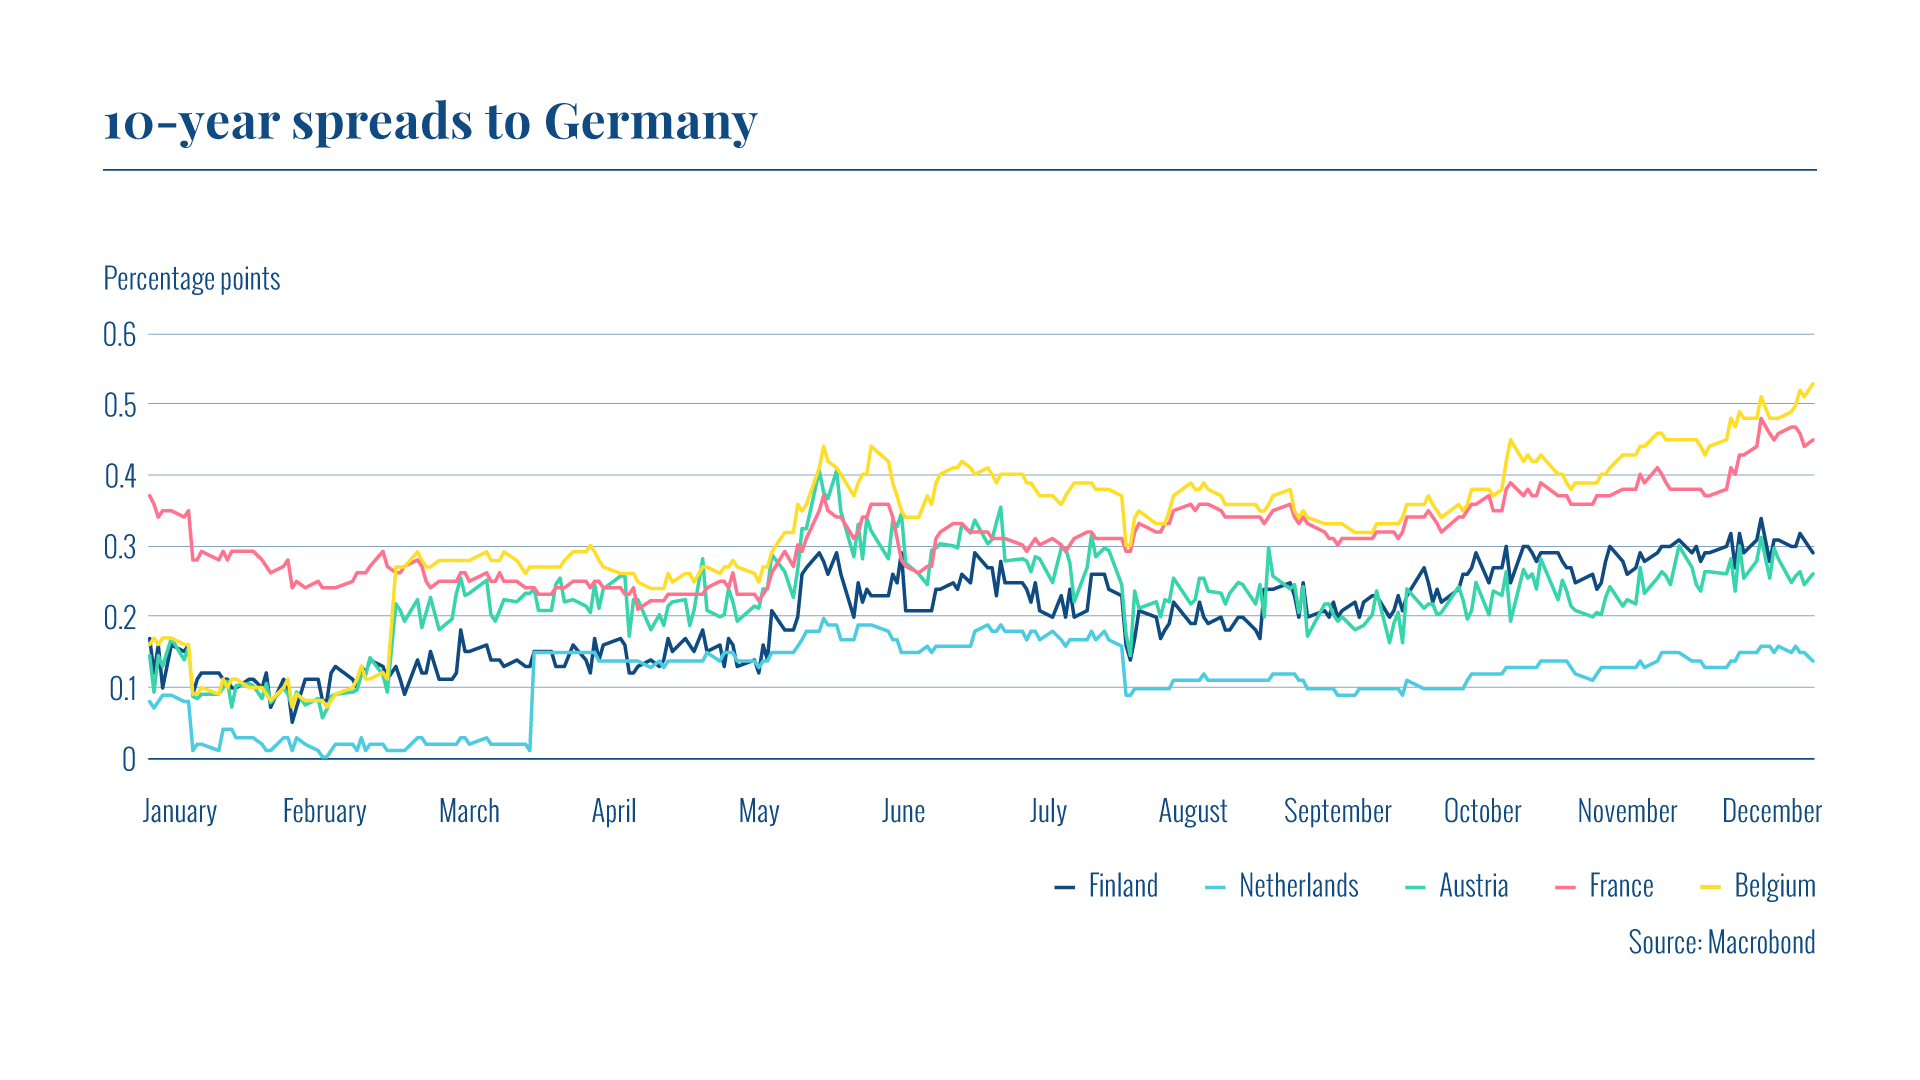 The graph shows the 10-year bond spreads of Finland, the Netherlands, Austria, France and Belgium against Germany. The spreads widened in the second half of 2018.